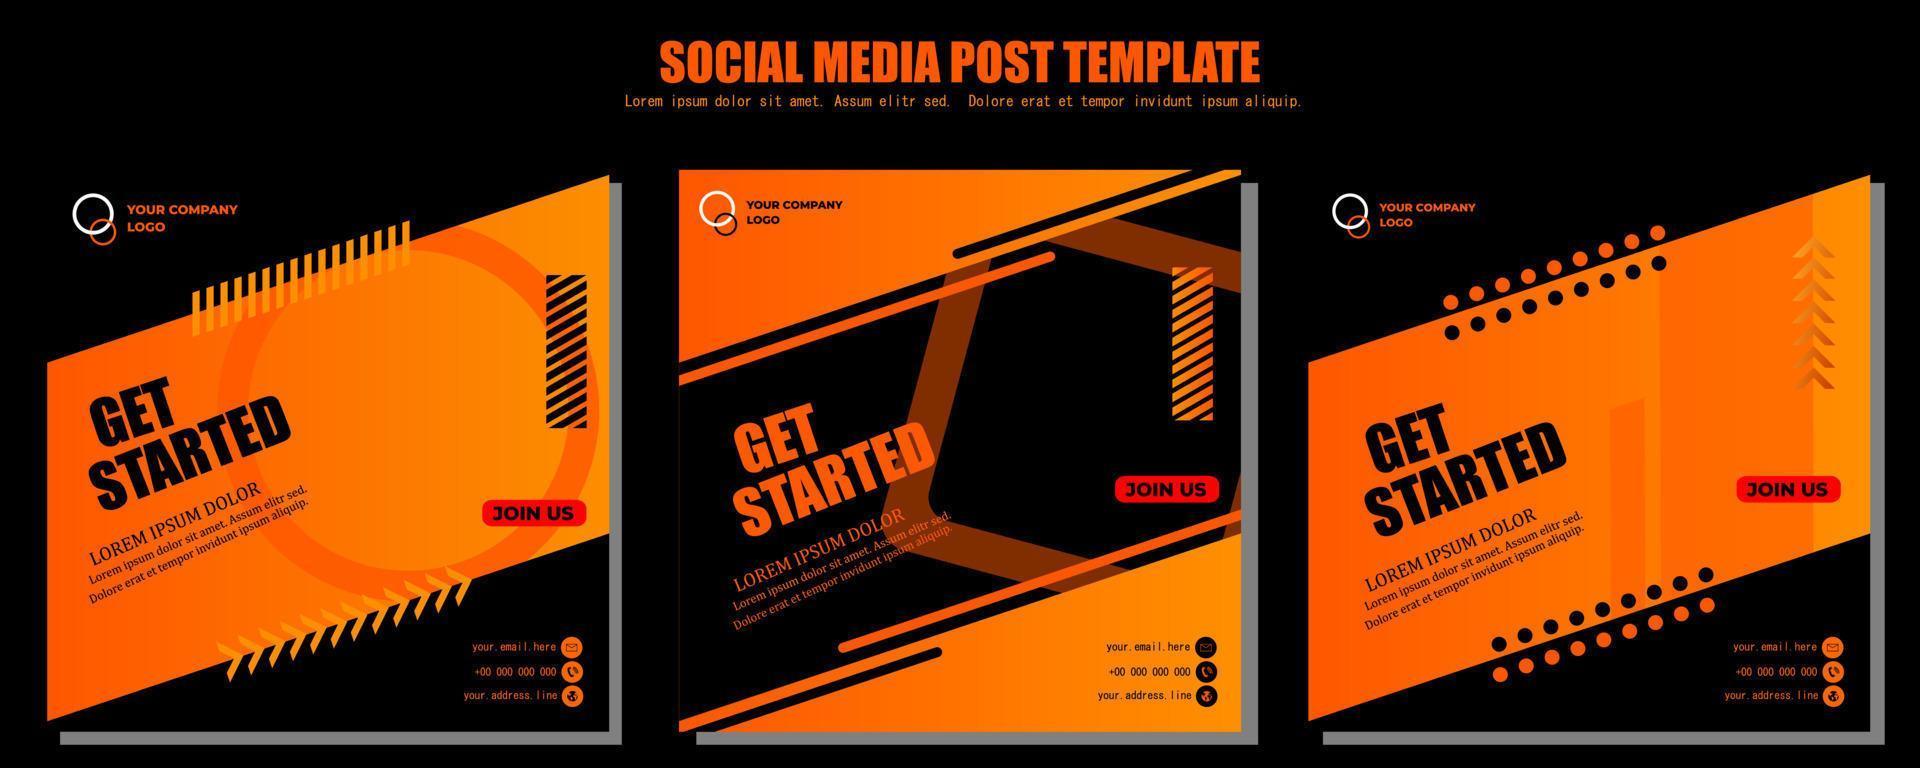 Orange and Black Vector Social Media Post Template, vector art illustration and text, Simple and Elegant Design